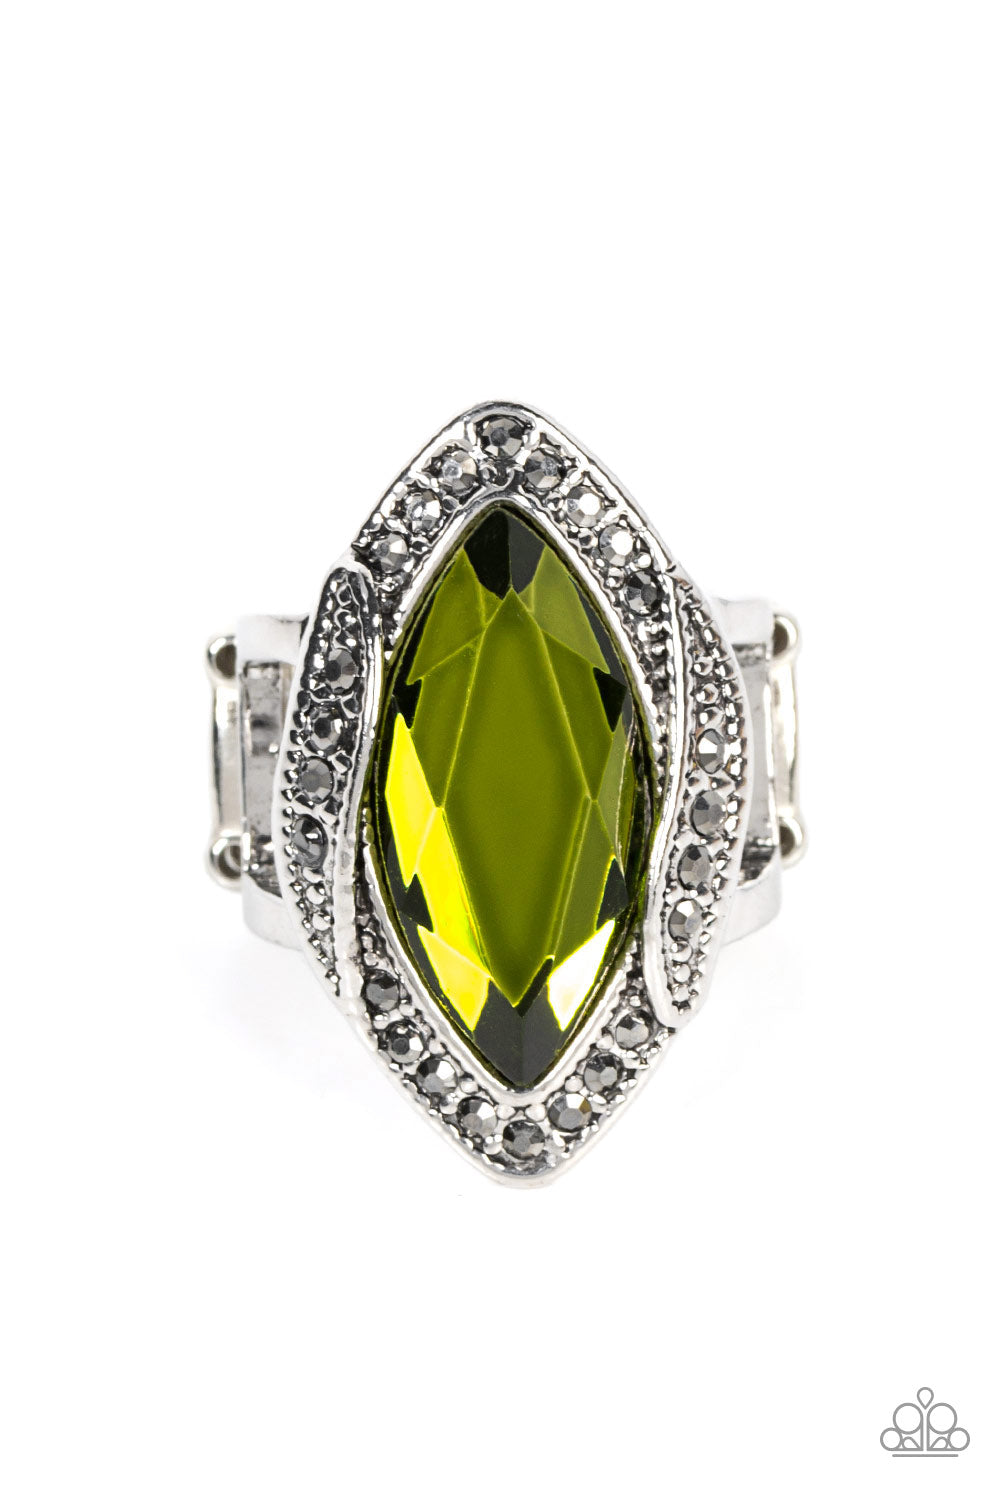 Paparazzi Accessories Let Me Take a REIGN Check - Green Dotted in dainty hematite rhinestones, folds of silver gather around an oversized marquise cut green gem for a gritty display of glitter atop the finger. Features a stretchy band for a flexible fit.